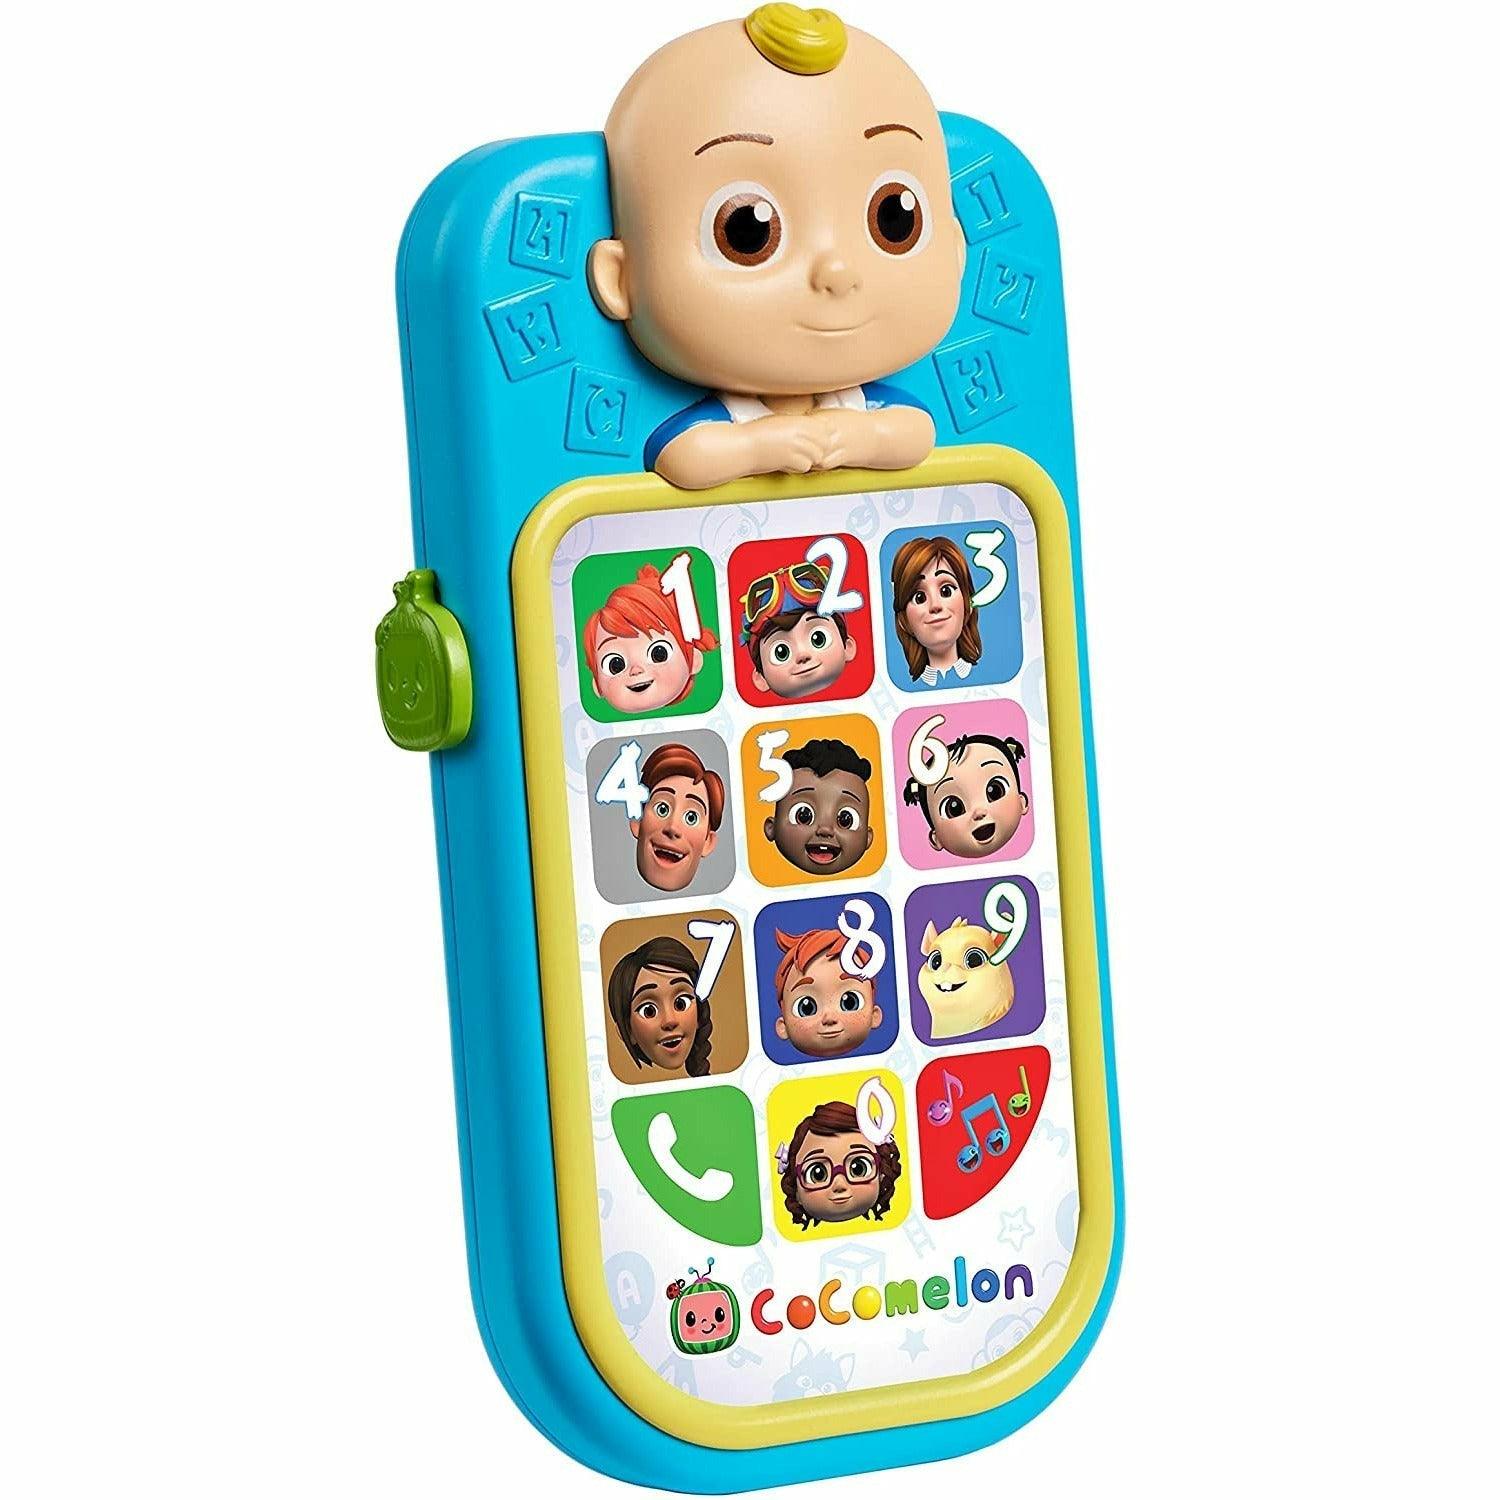 CoComelon JJ’s First Learning Toy Phone for Kids with Lights, Sounds, Music - BumbleToys - 0-24 Months, Boys, Cocomelon, Musical Instruments, OXE, Phone, Pre-Order